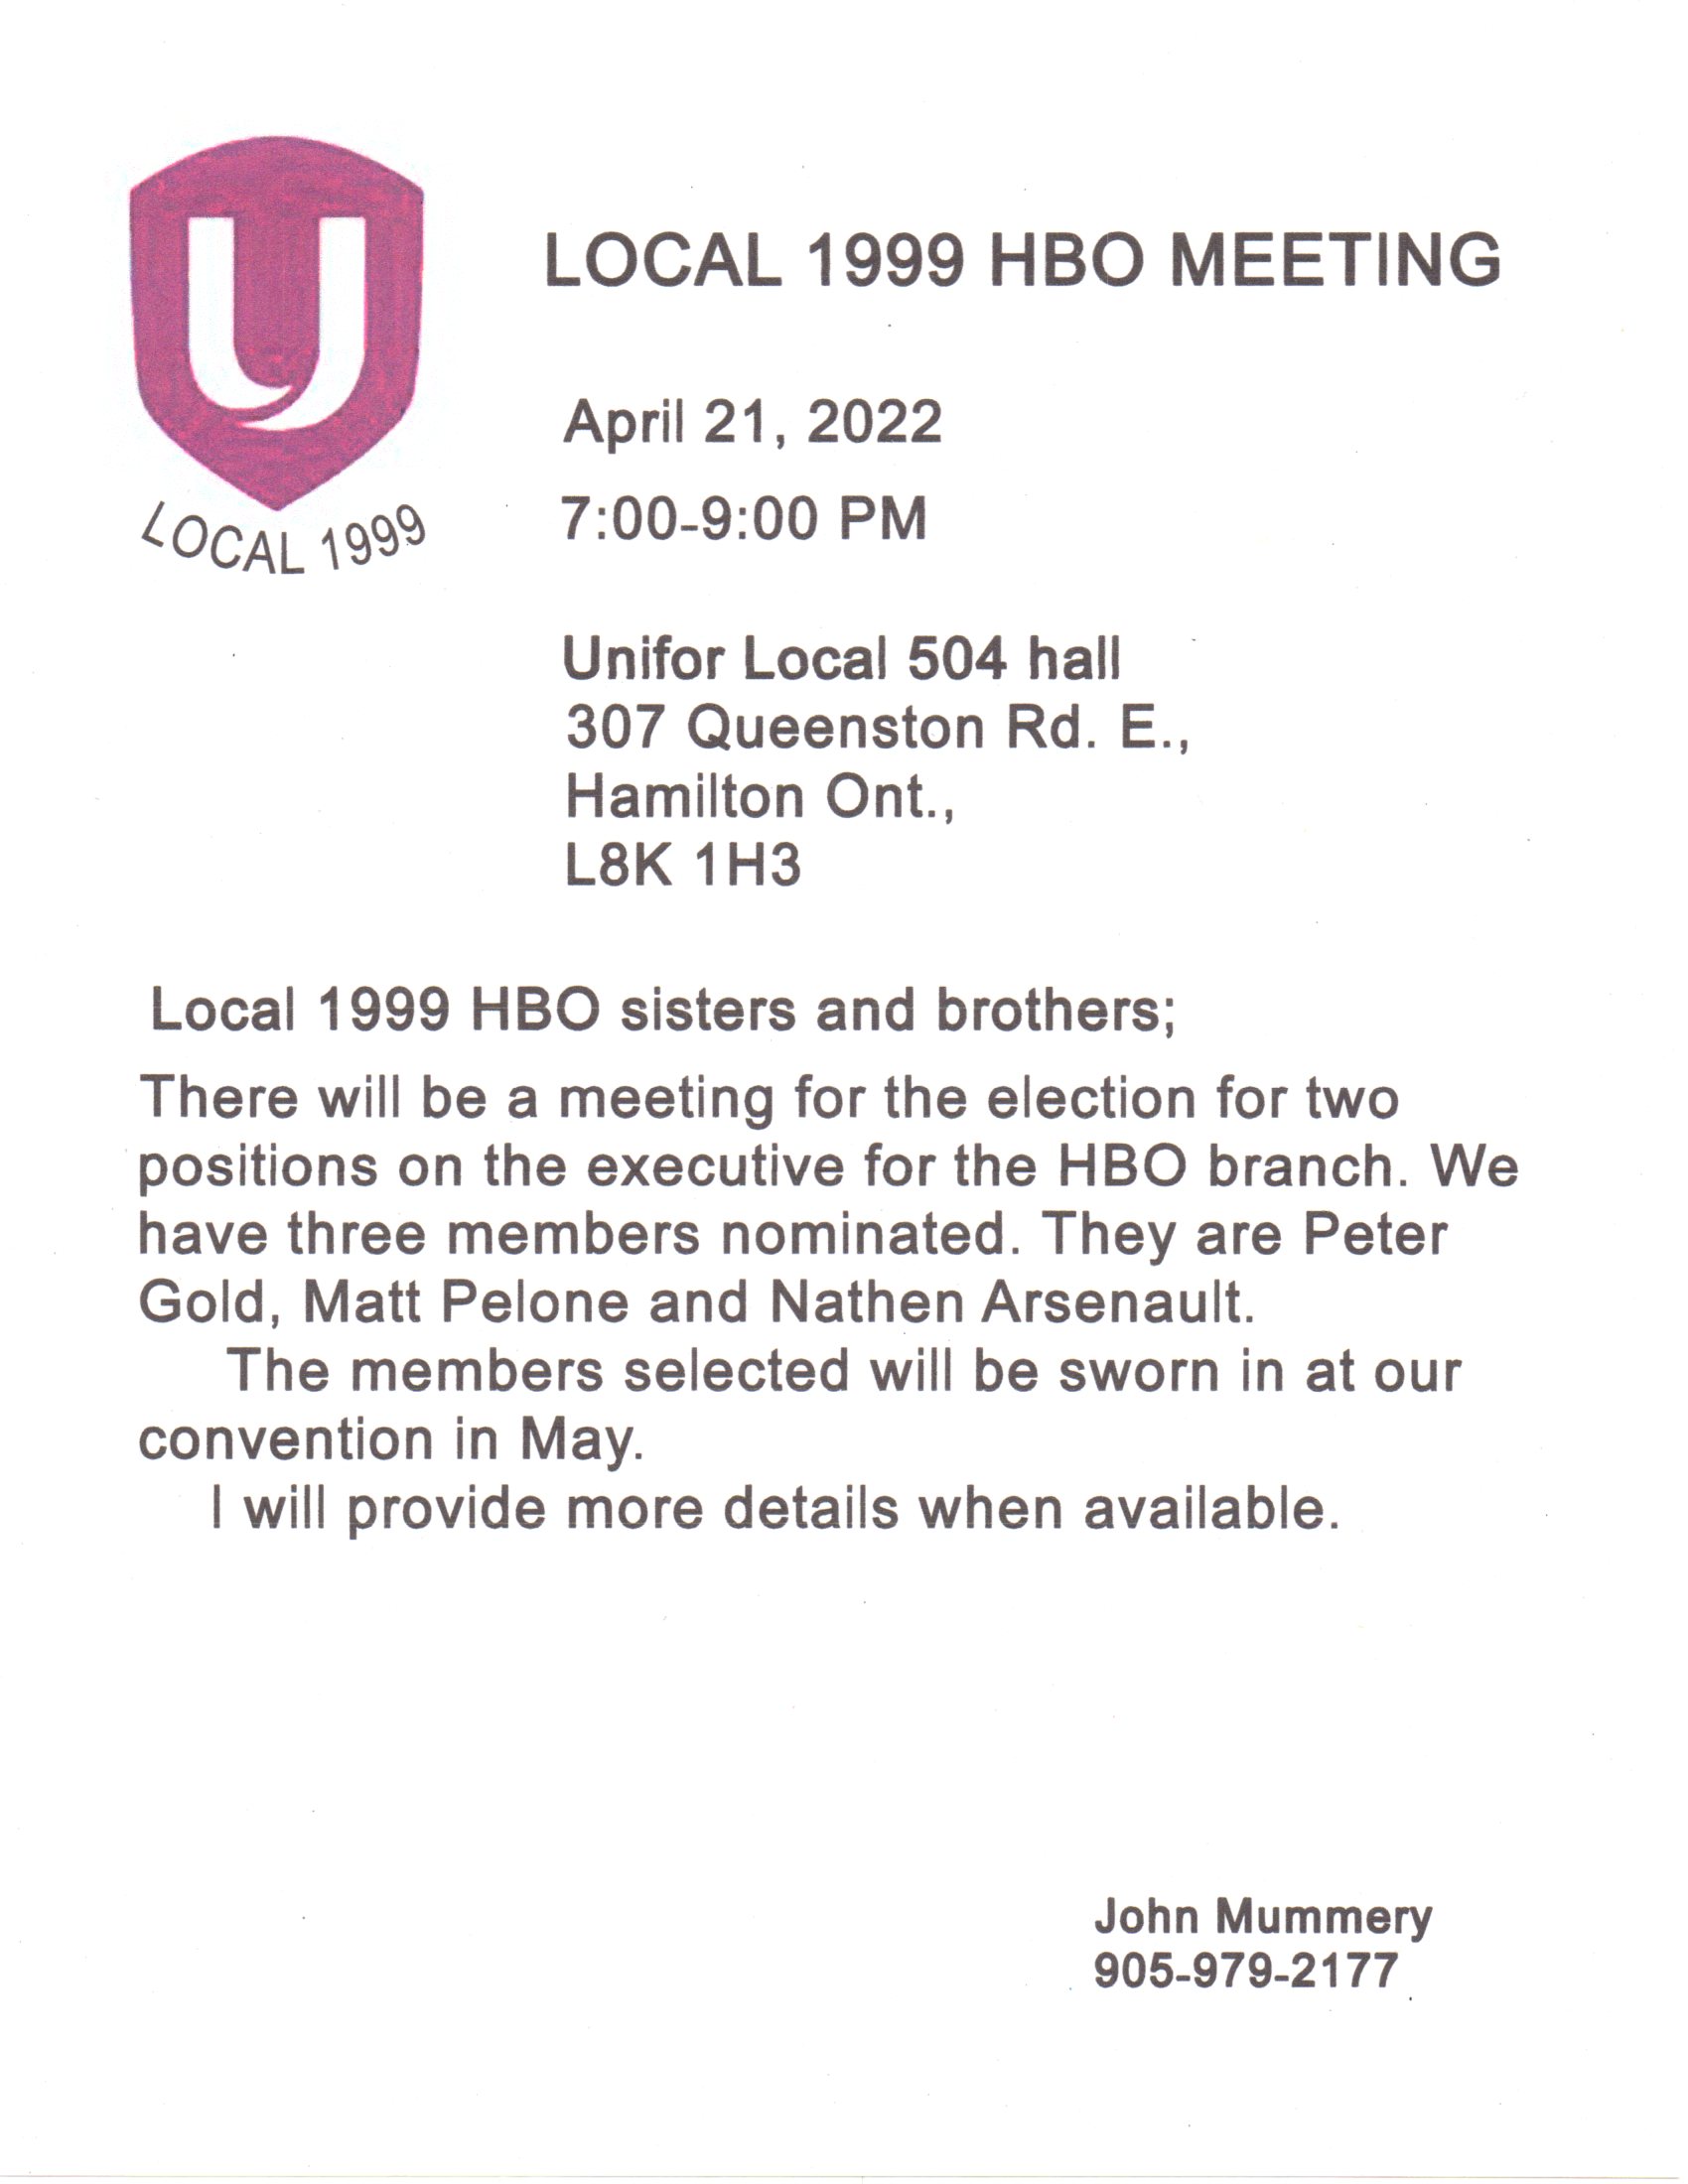 HBO Union Meeting